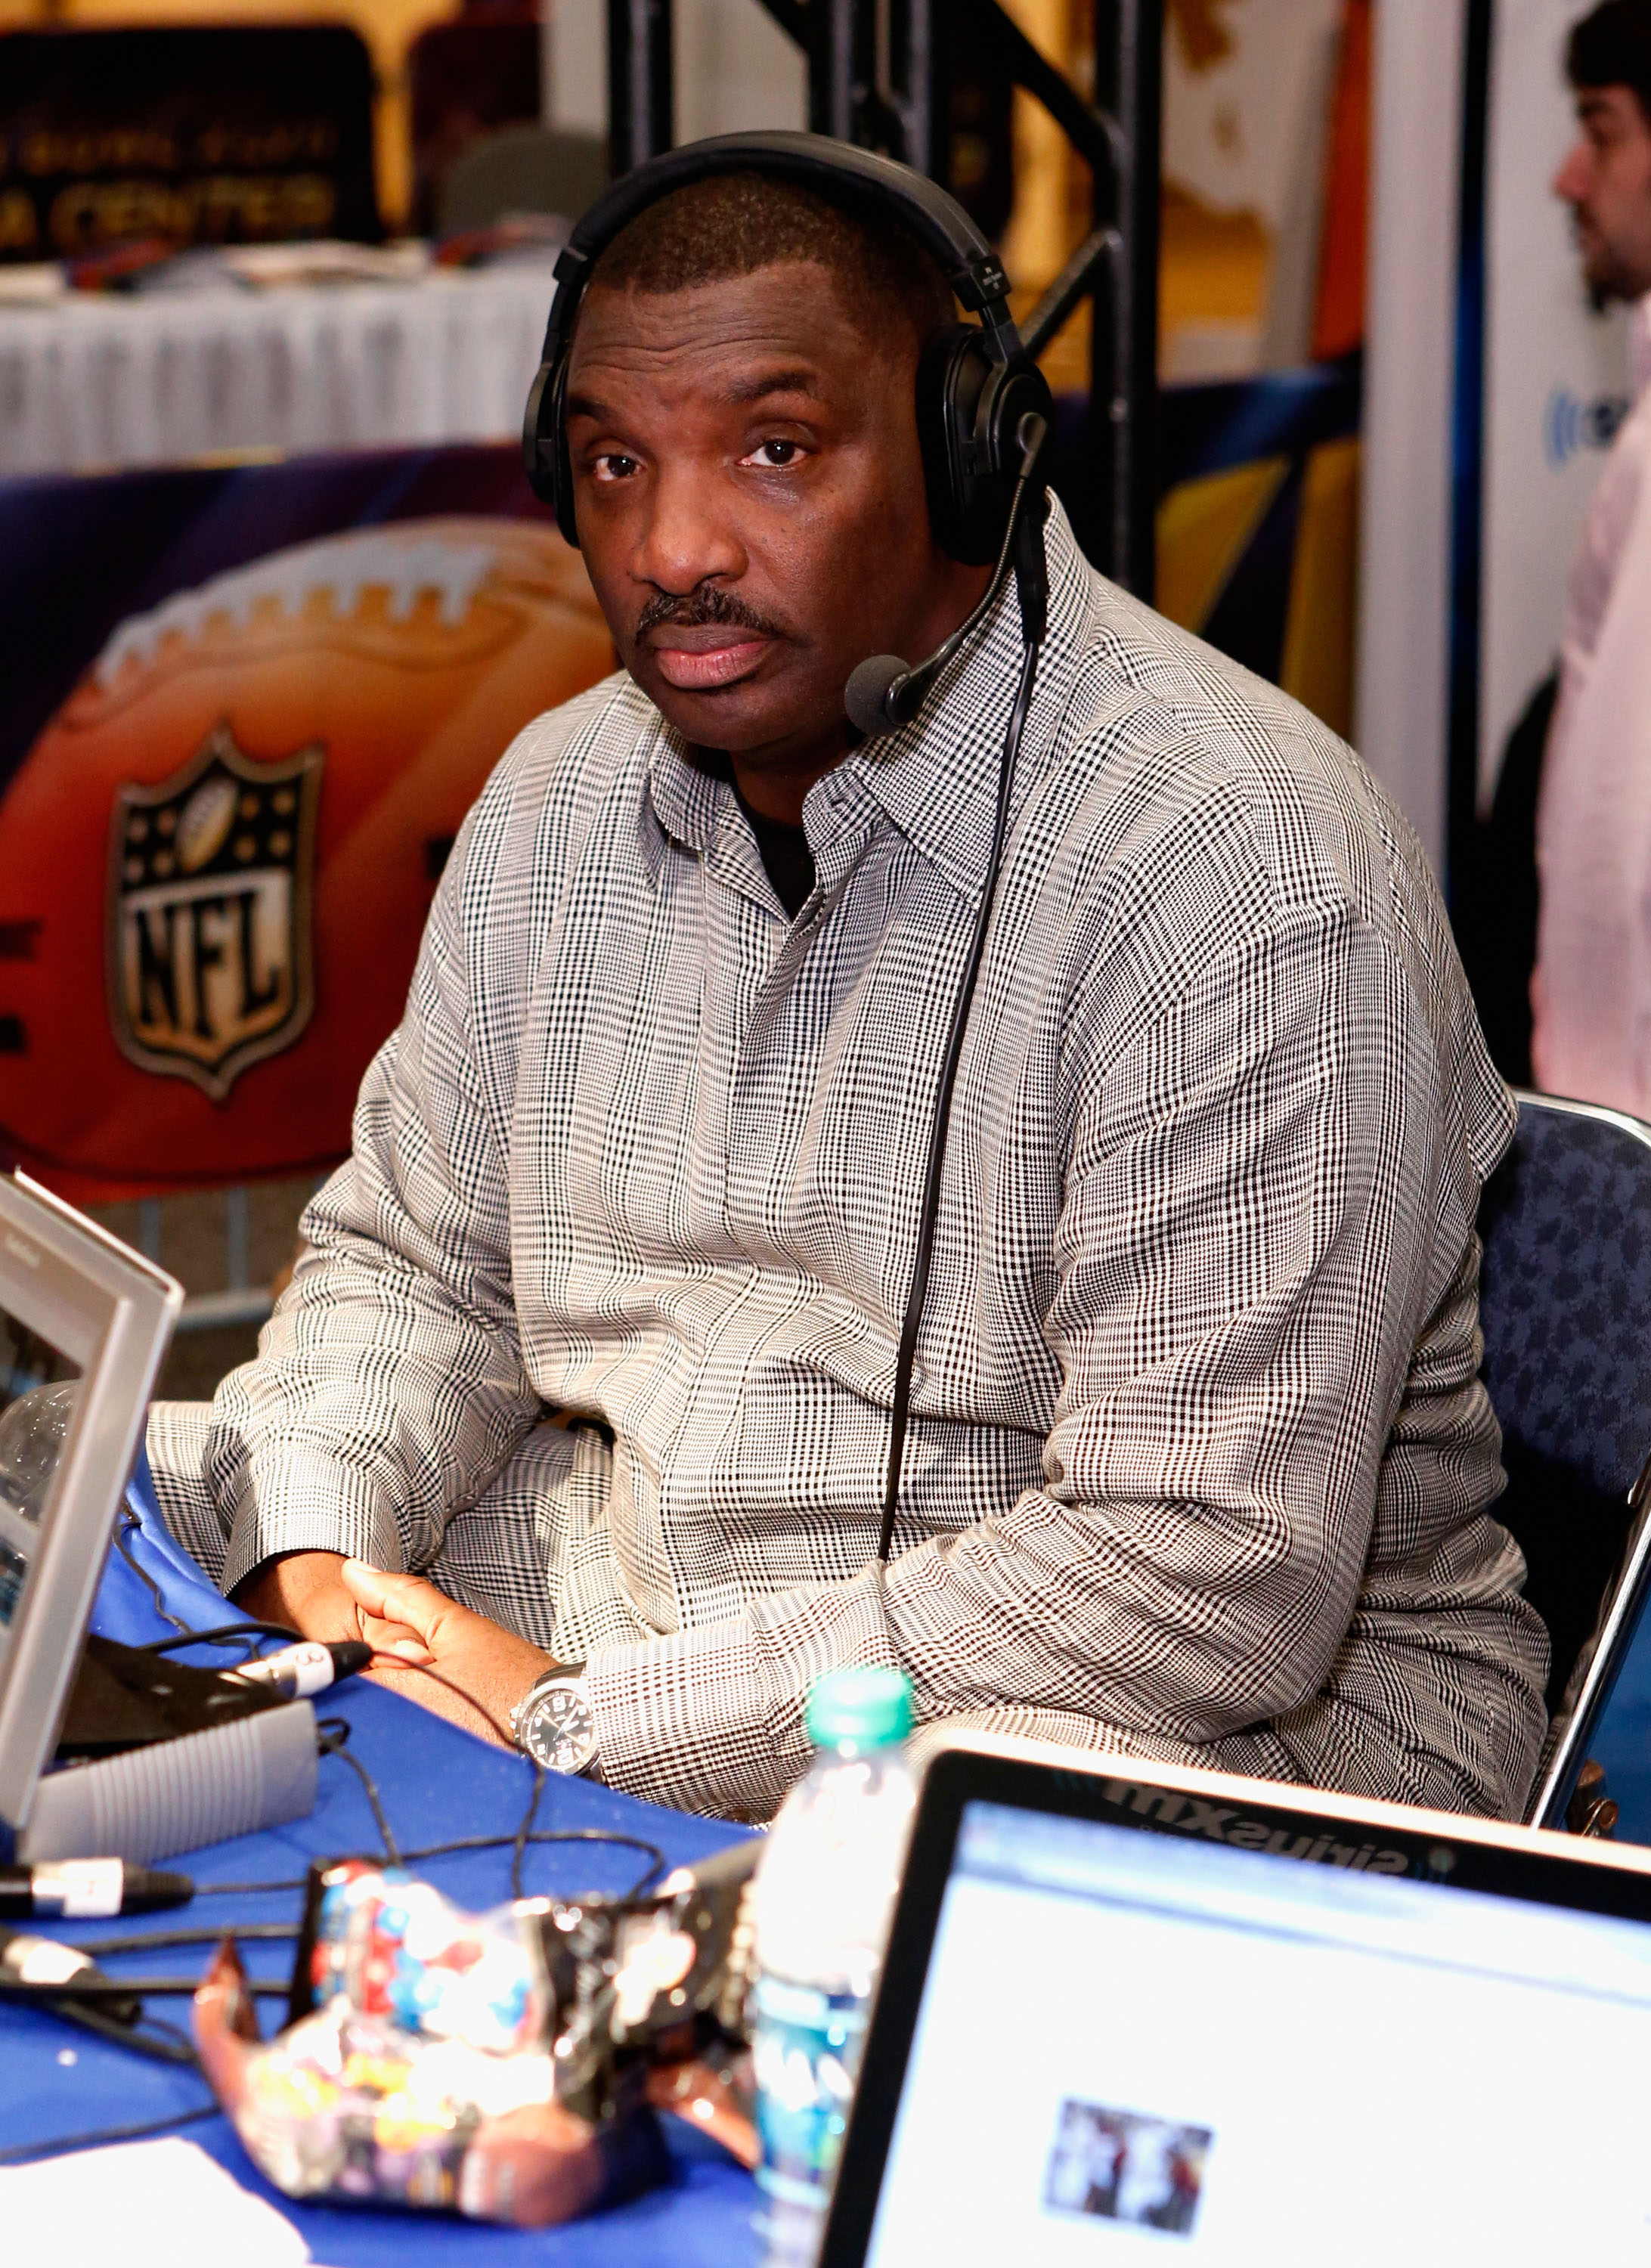 SiriusXM Broadcasts Live From Radio Row During Bowl XLVII Week In New Orleans